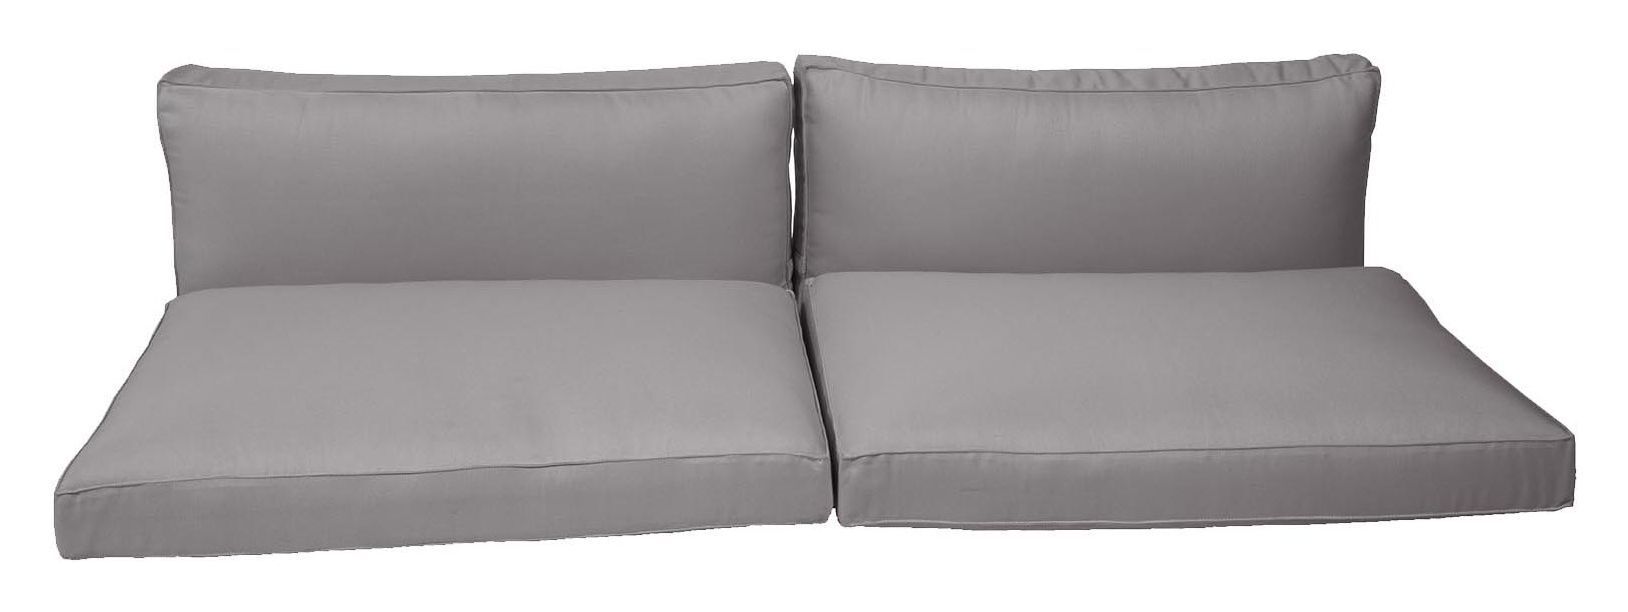 Cane-line Chester 3-pers. Loungesofa Putesett, Taupe, Cane-line Natté   Unoliving